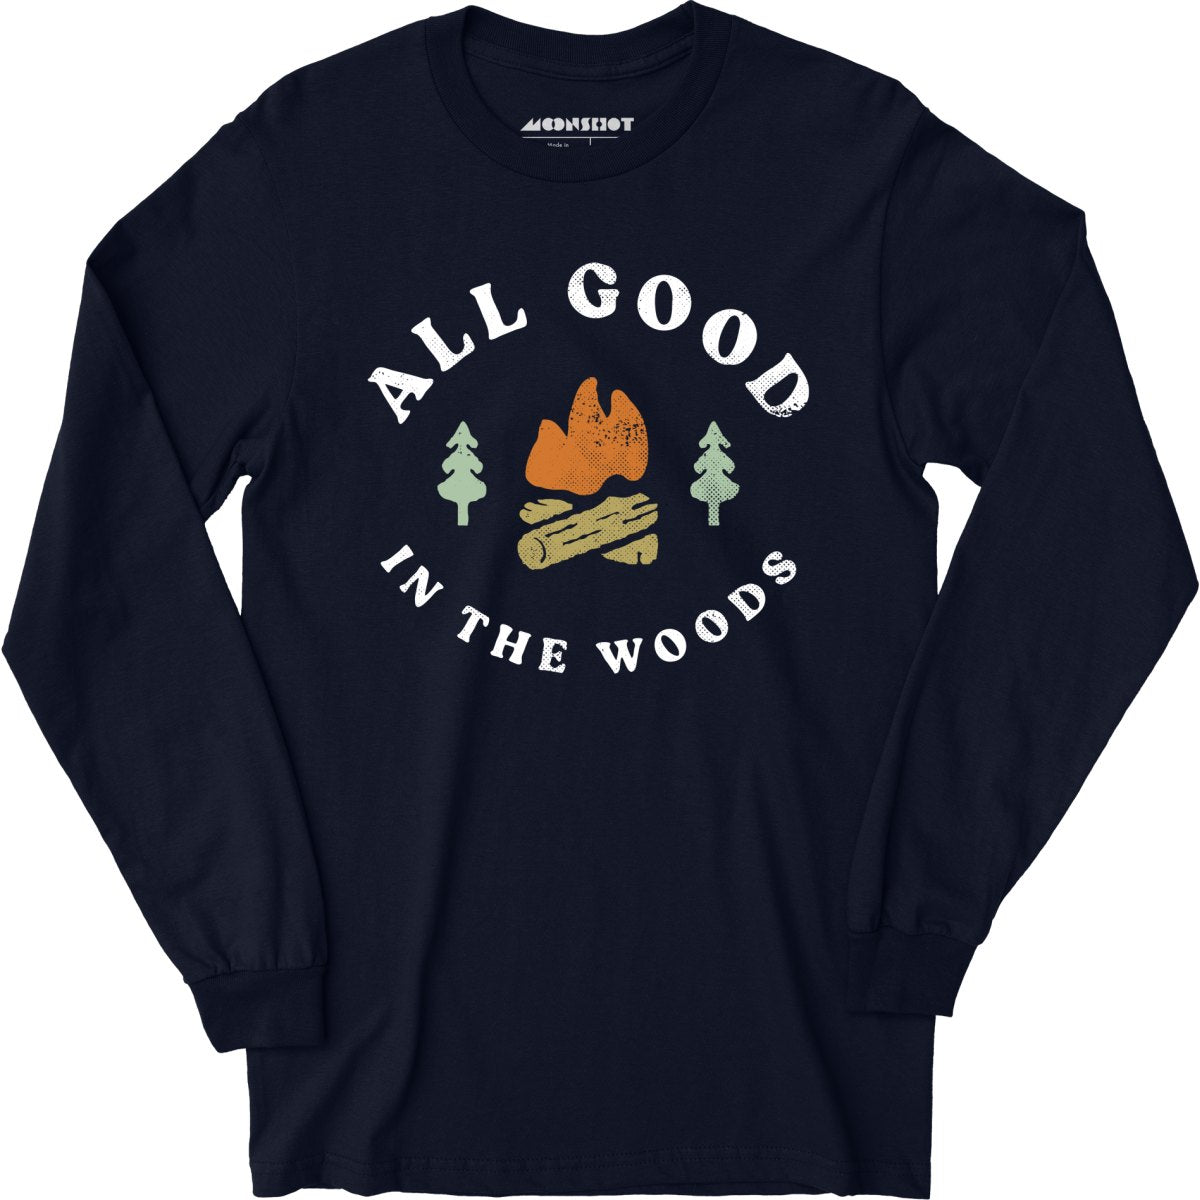 All Good in The Woods - Long Sleeve T-Shirt